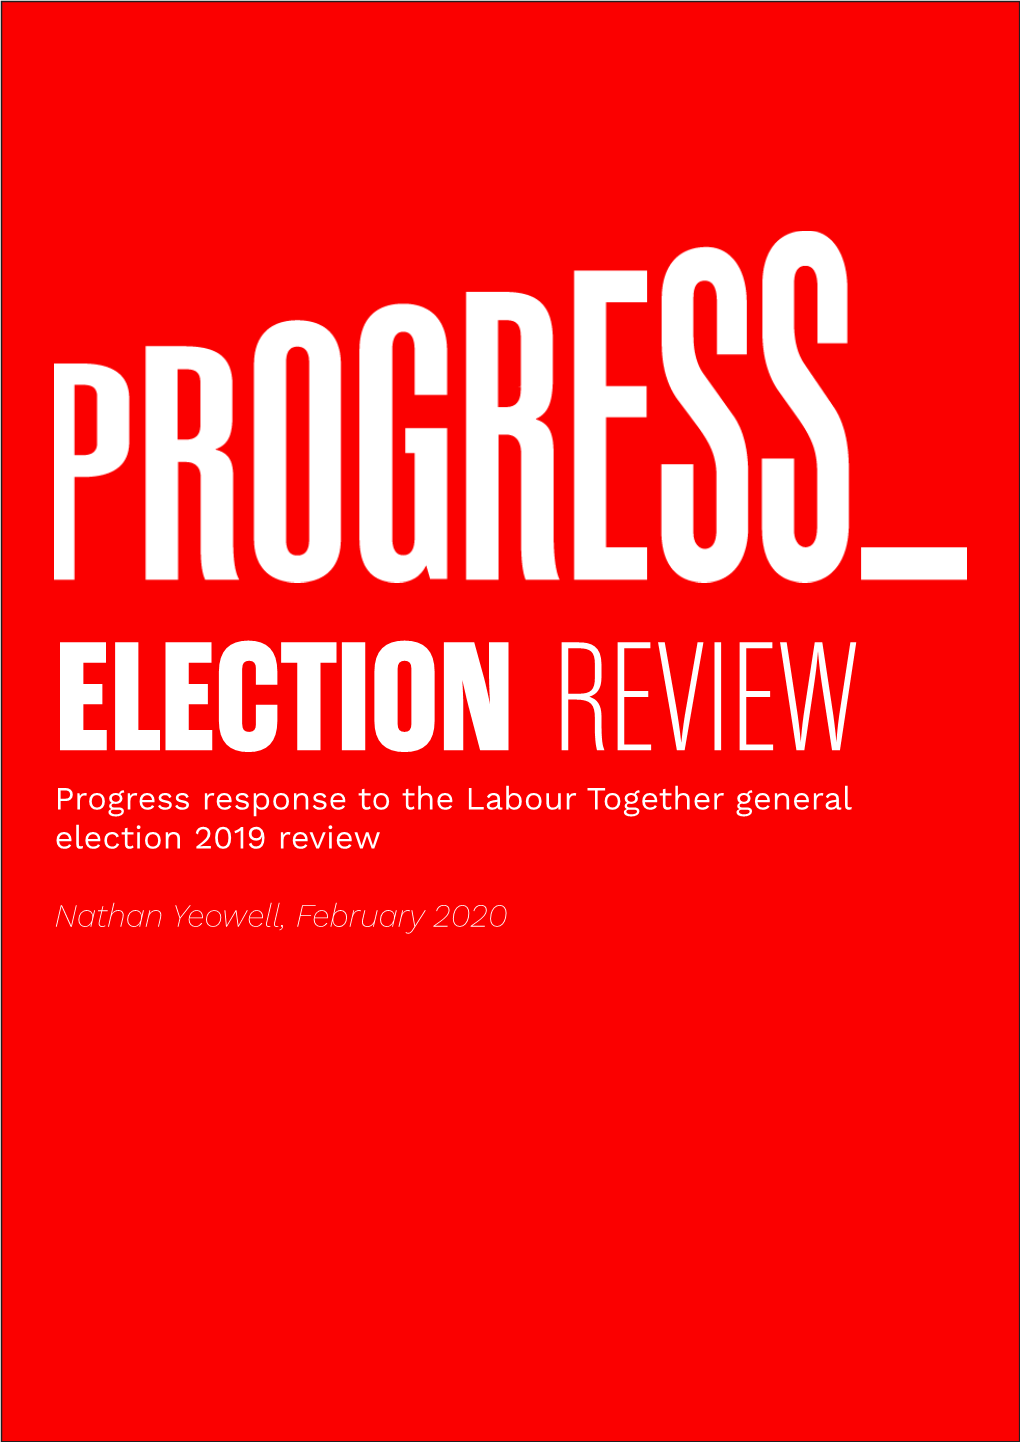 Progress Response to the Labour Together General Election 2019 Review